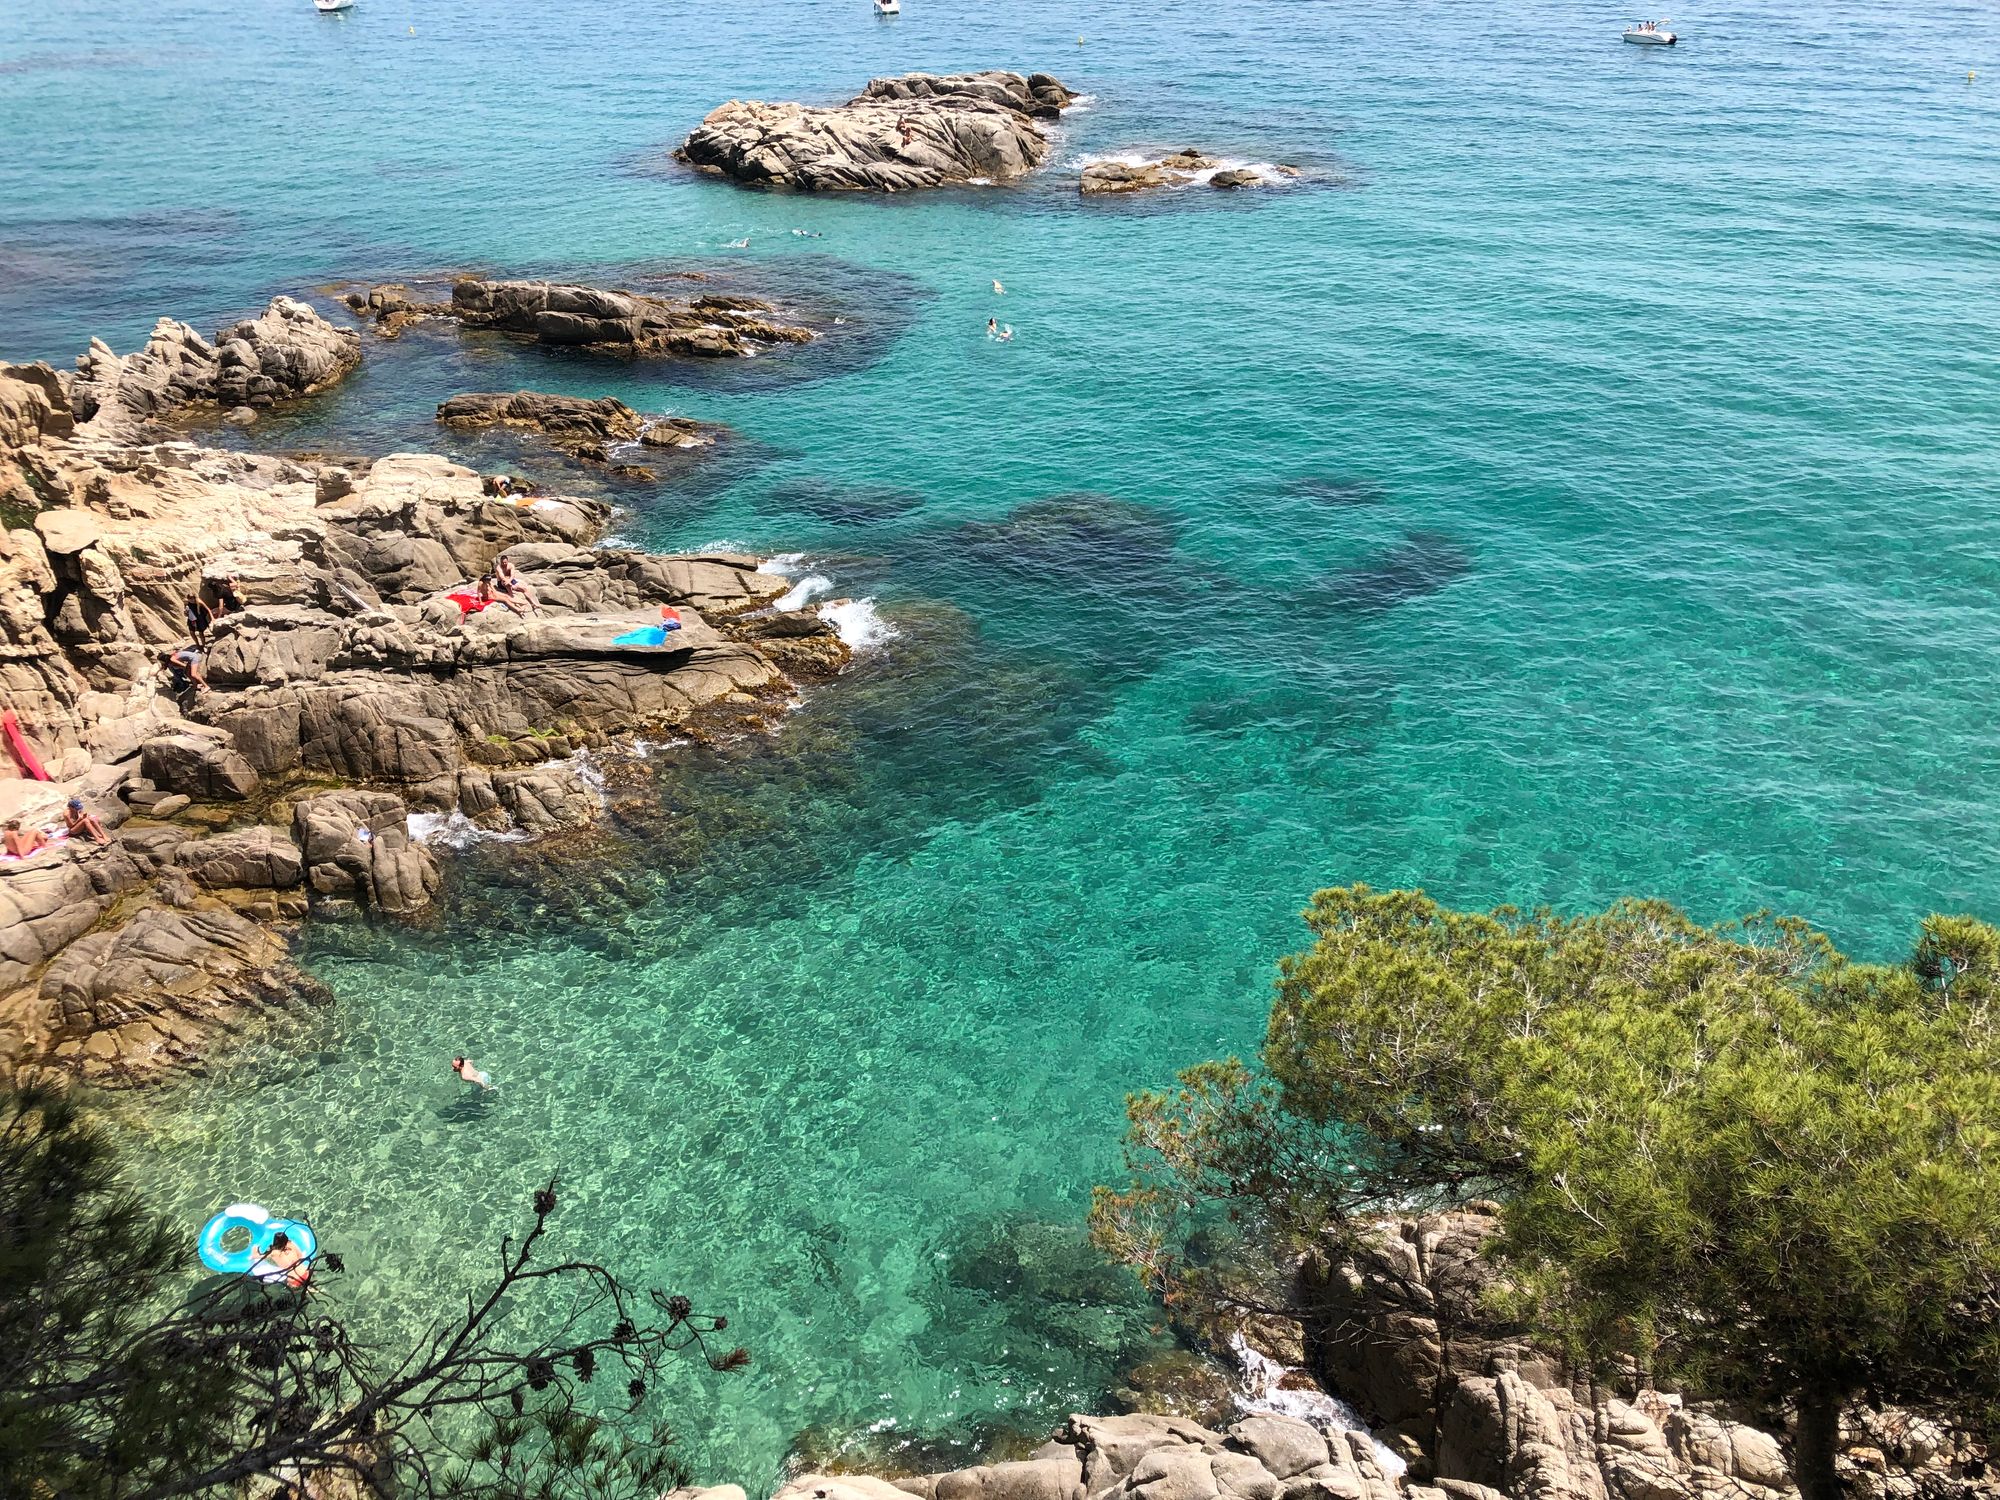 rocky outcrops fading into clear turquoise waters with sun bathers and swimmers